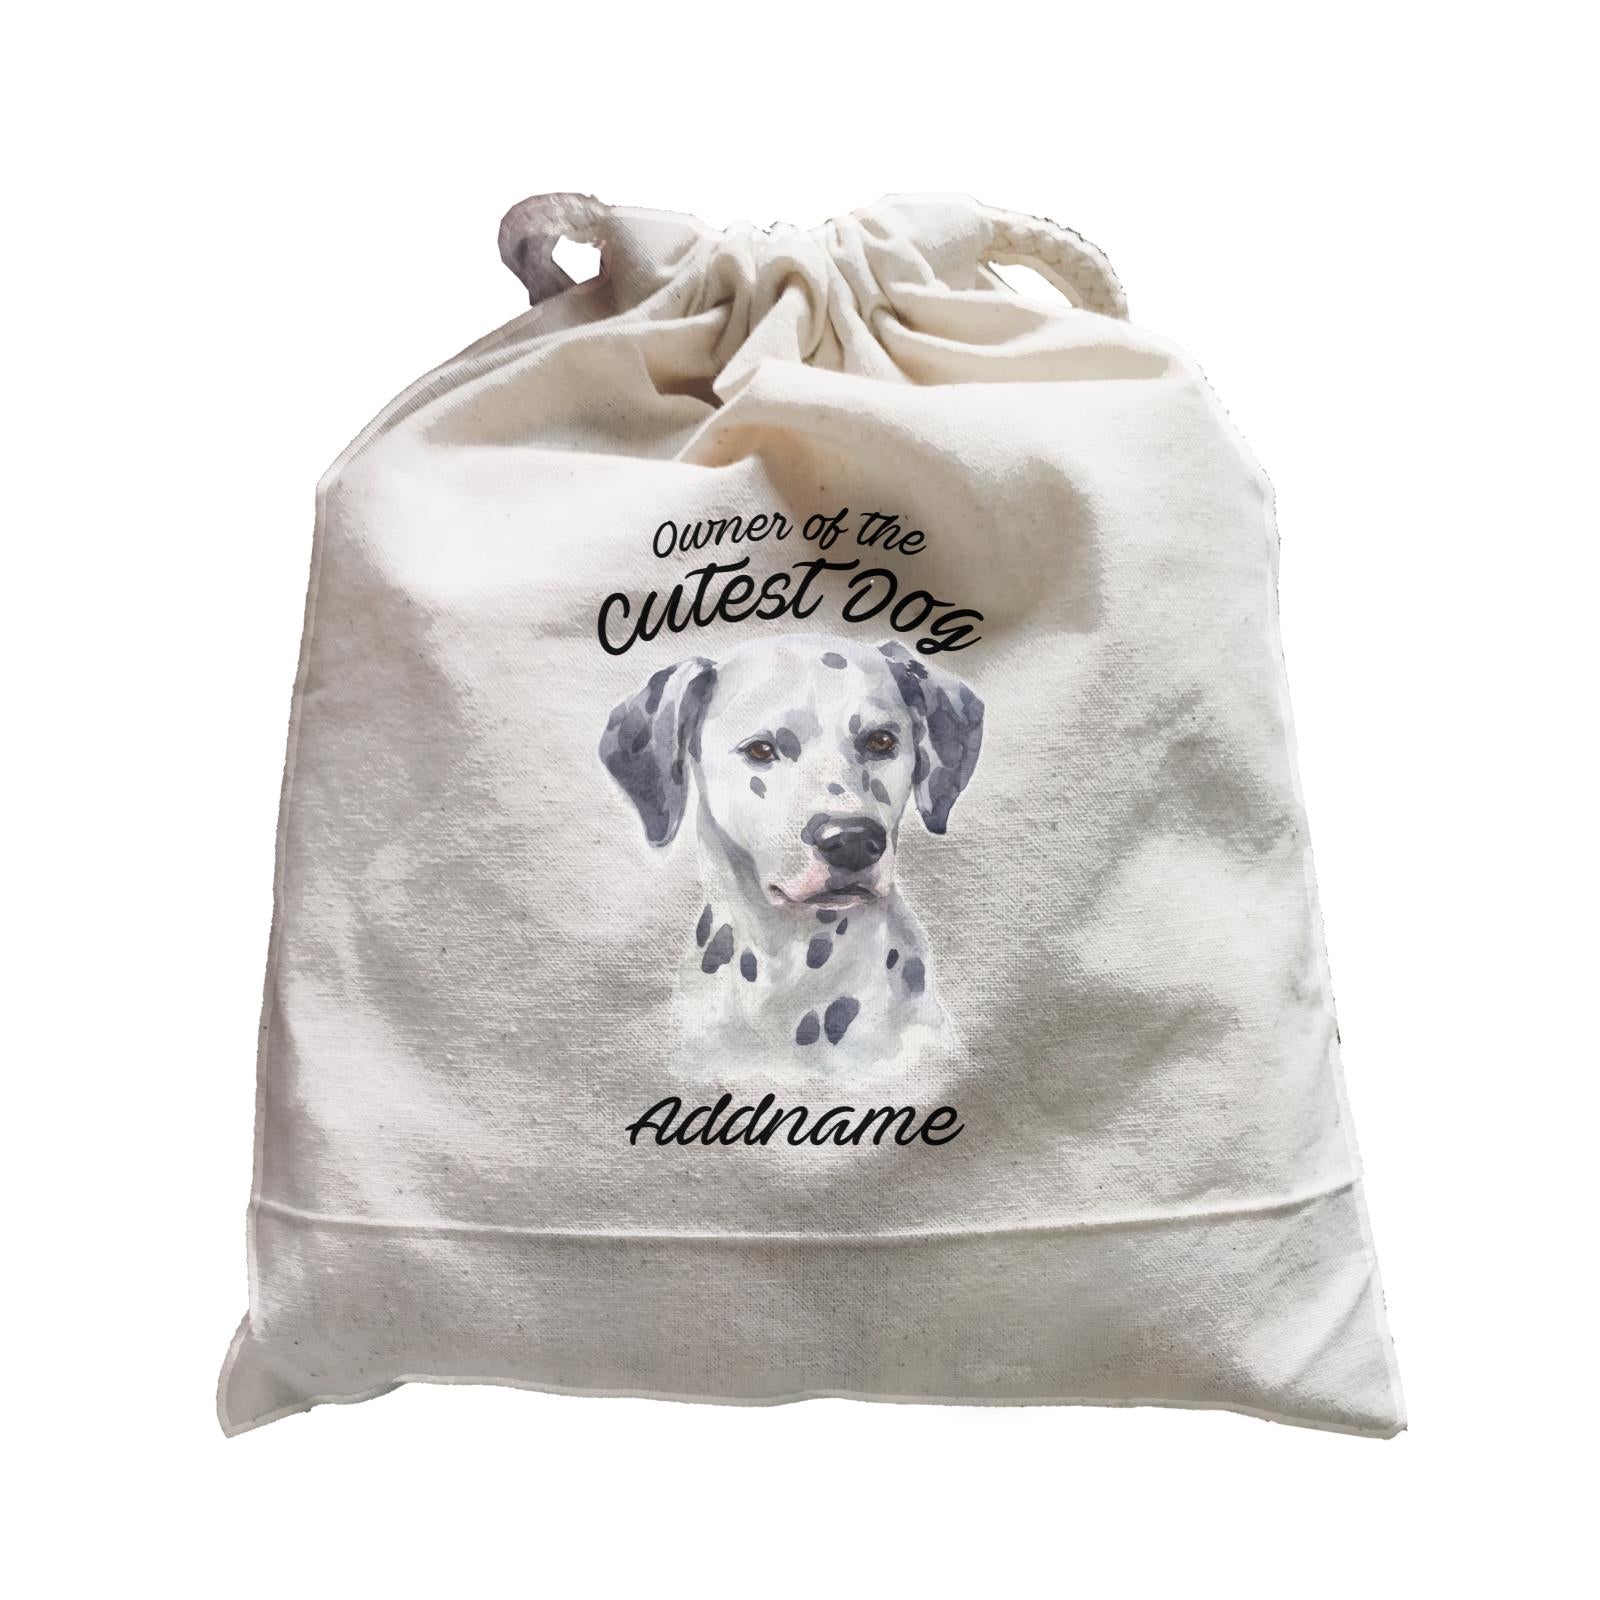 Watercolor Dog Owner Of The Cutest Dog Dalmatian Addname Satchel